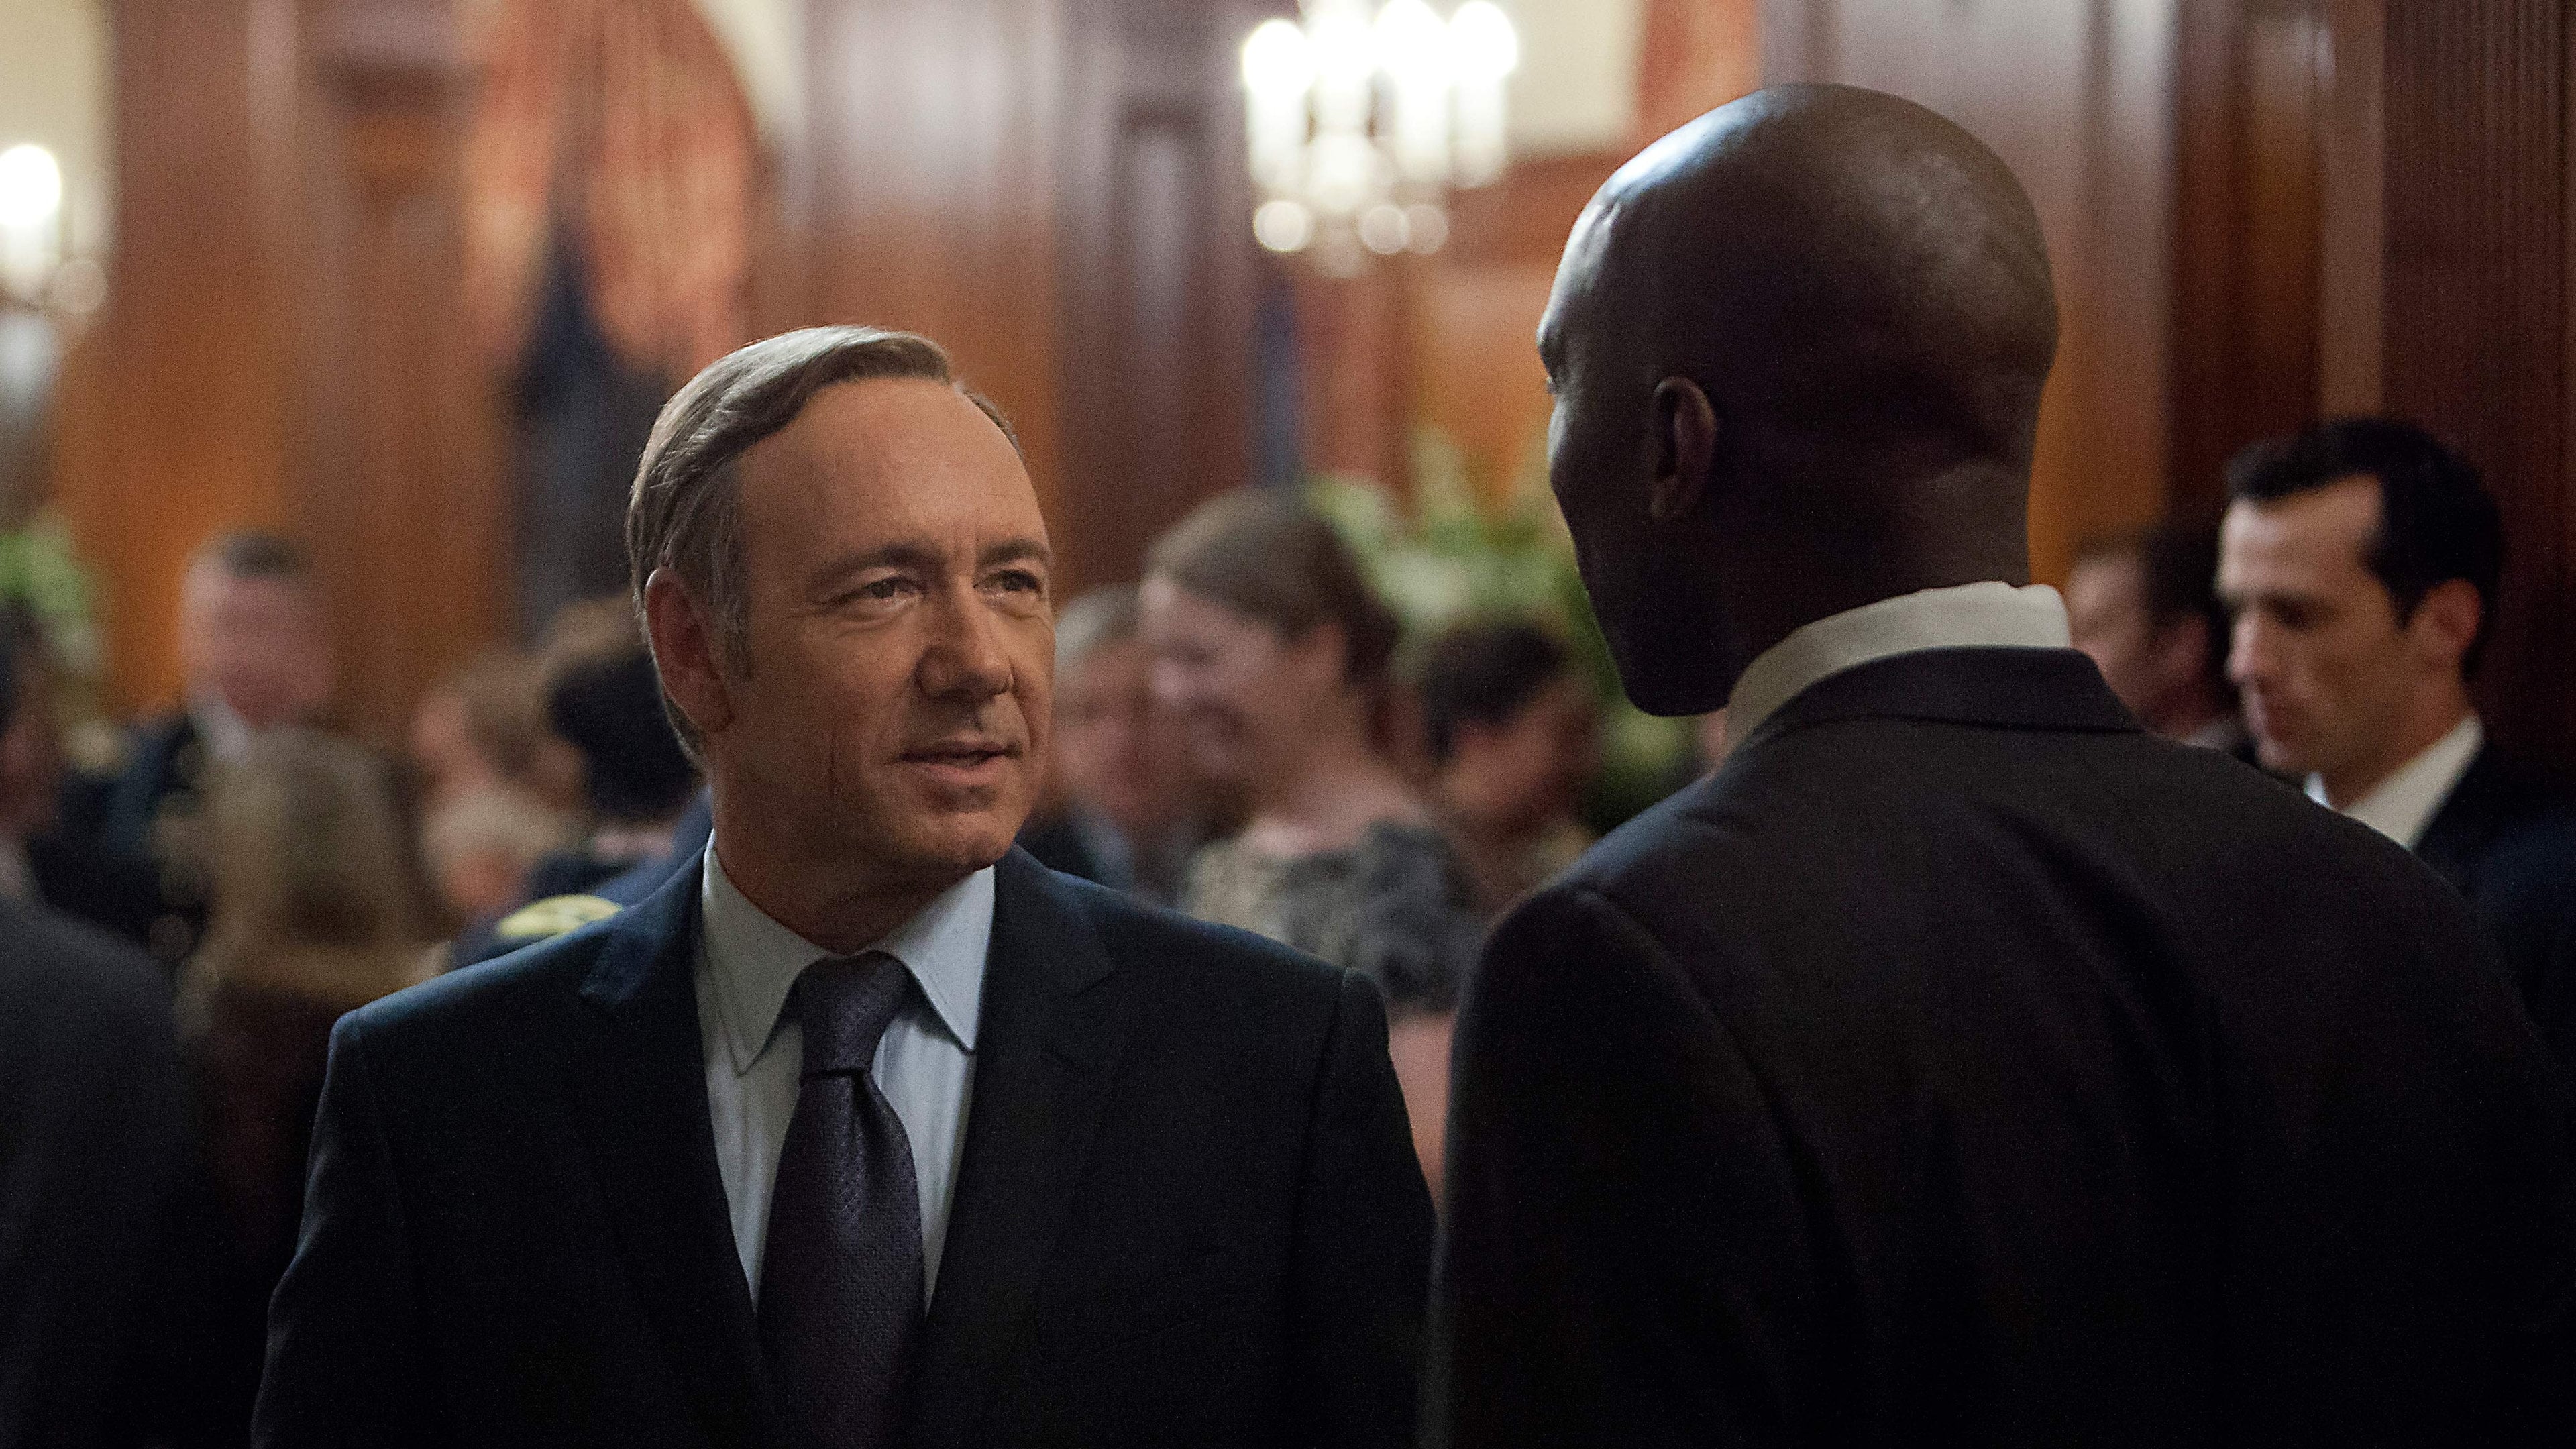 Sous titres house of cards s02e04 torrent cycore effects torrent